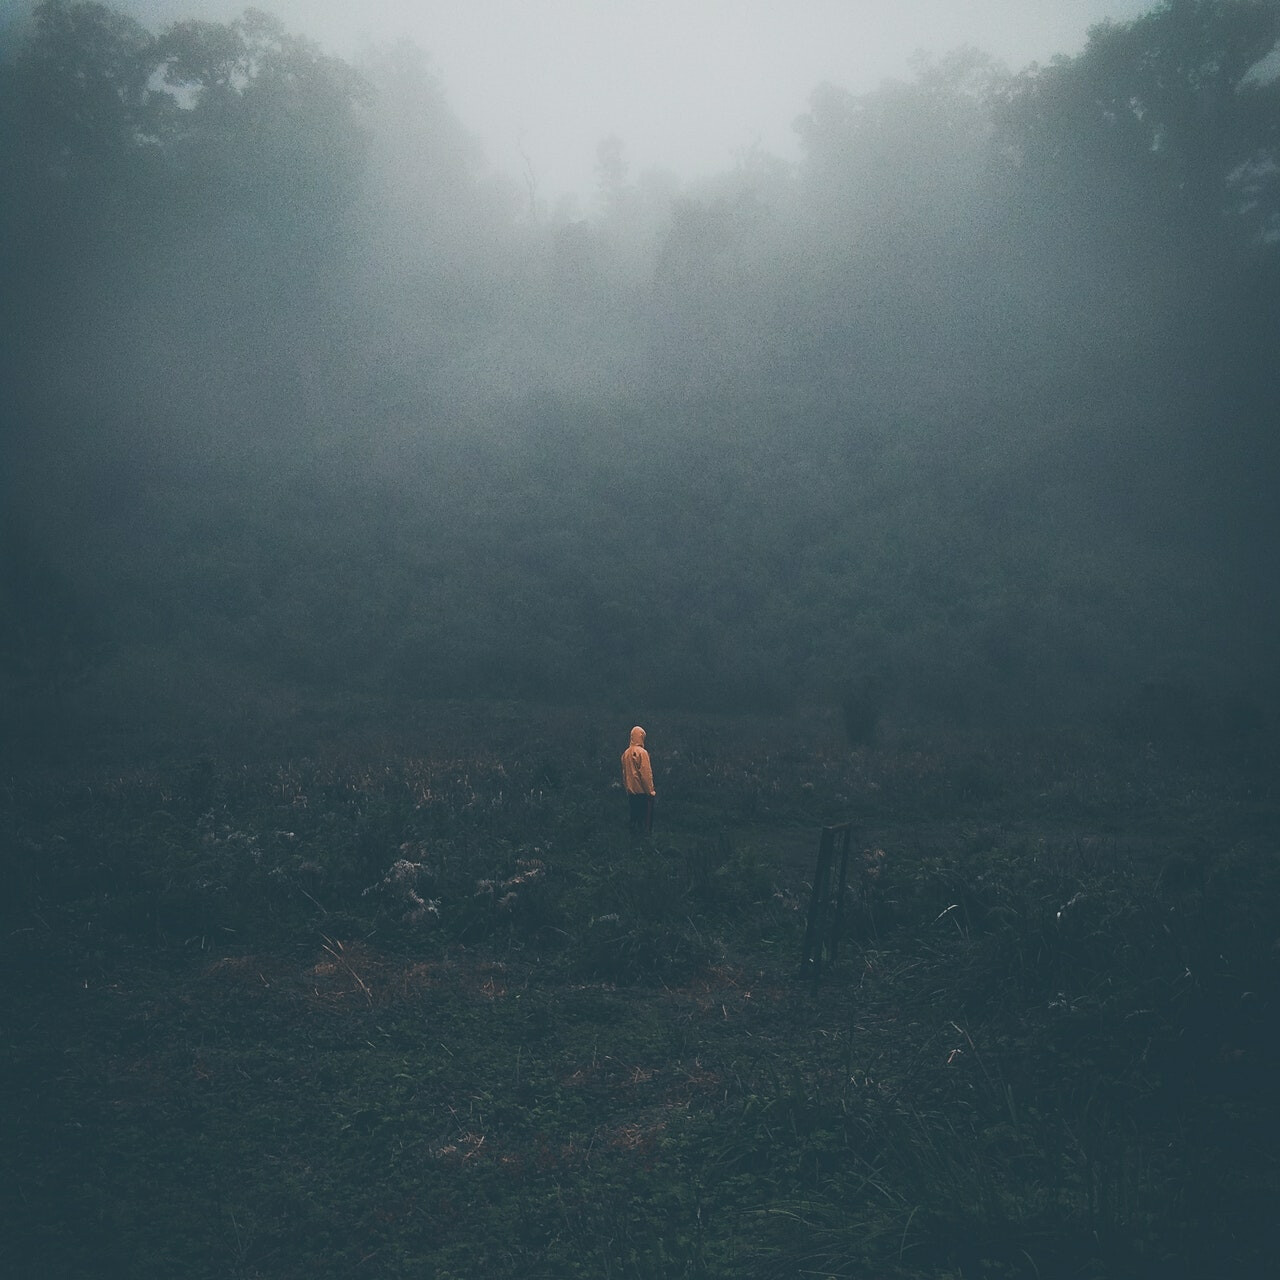 Lonely person in forest